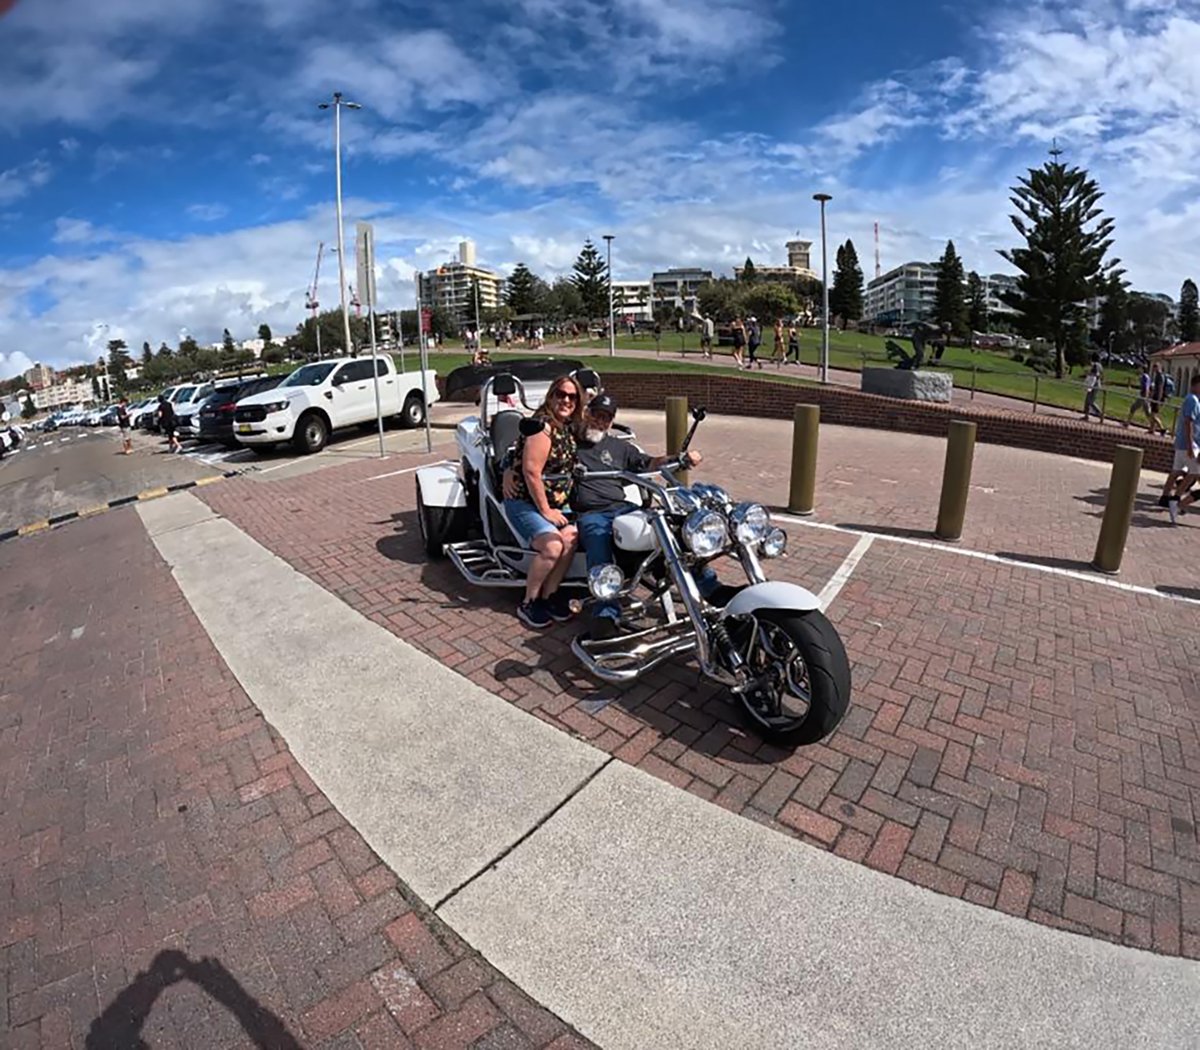 Review: Eastern Sydney Panorama trike tour
The ride was amazing and the tour guides were informative and friendly. We saw so many cool things including the Opera House and Bondi Beach.
Janelle
#trolltours provide #harleyandtriketours. So #feelthefreedom in #sydney #excitement